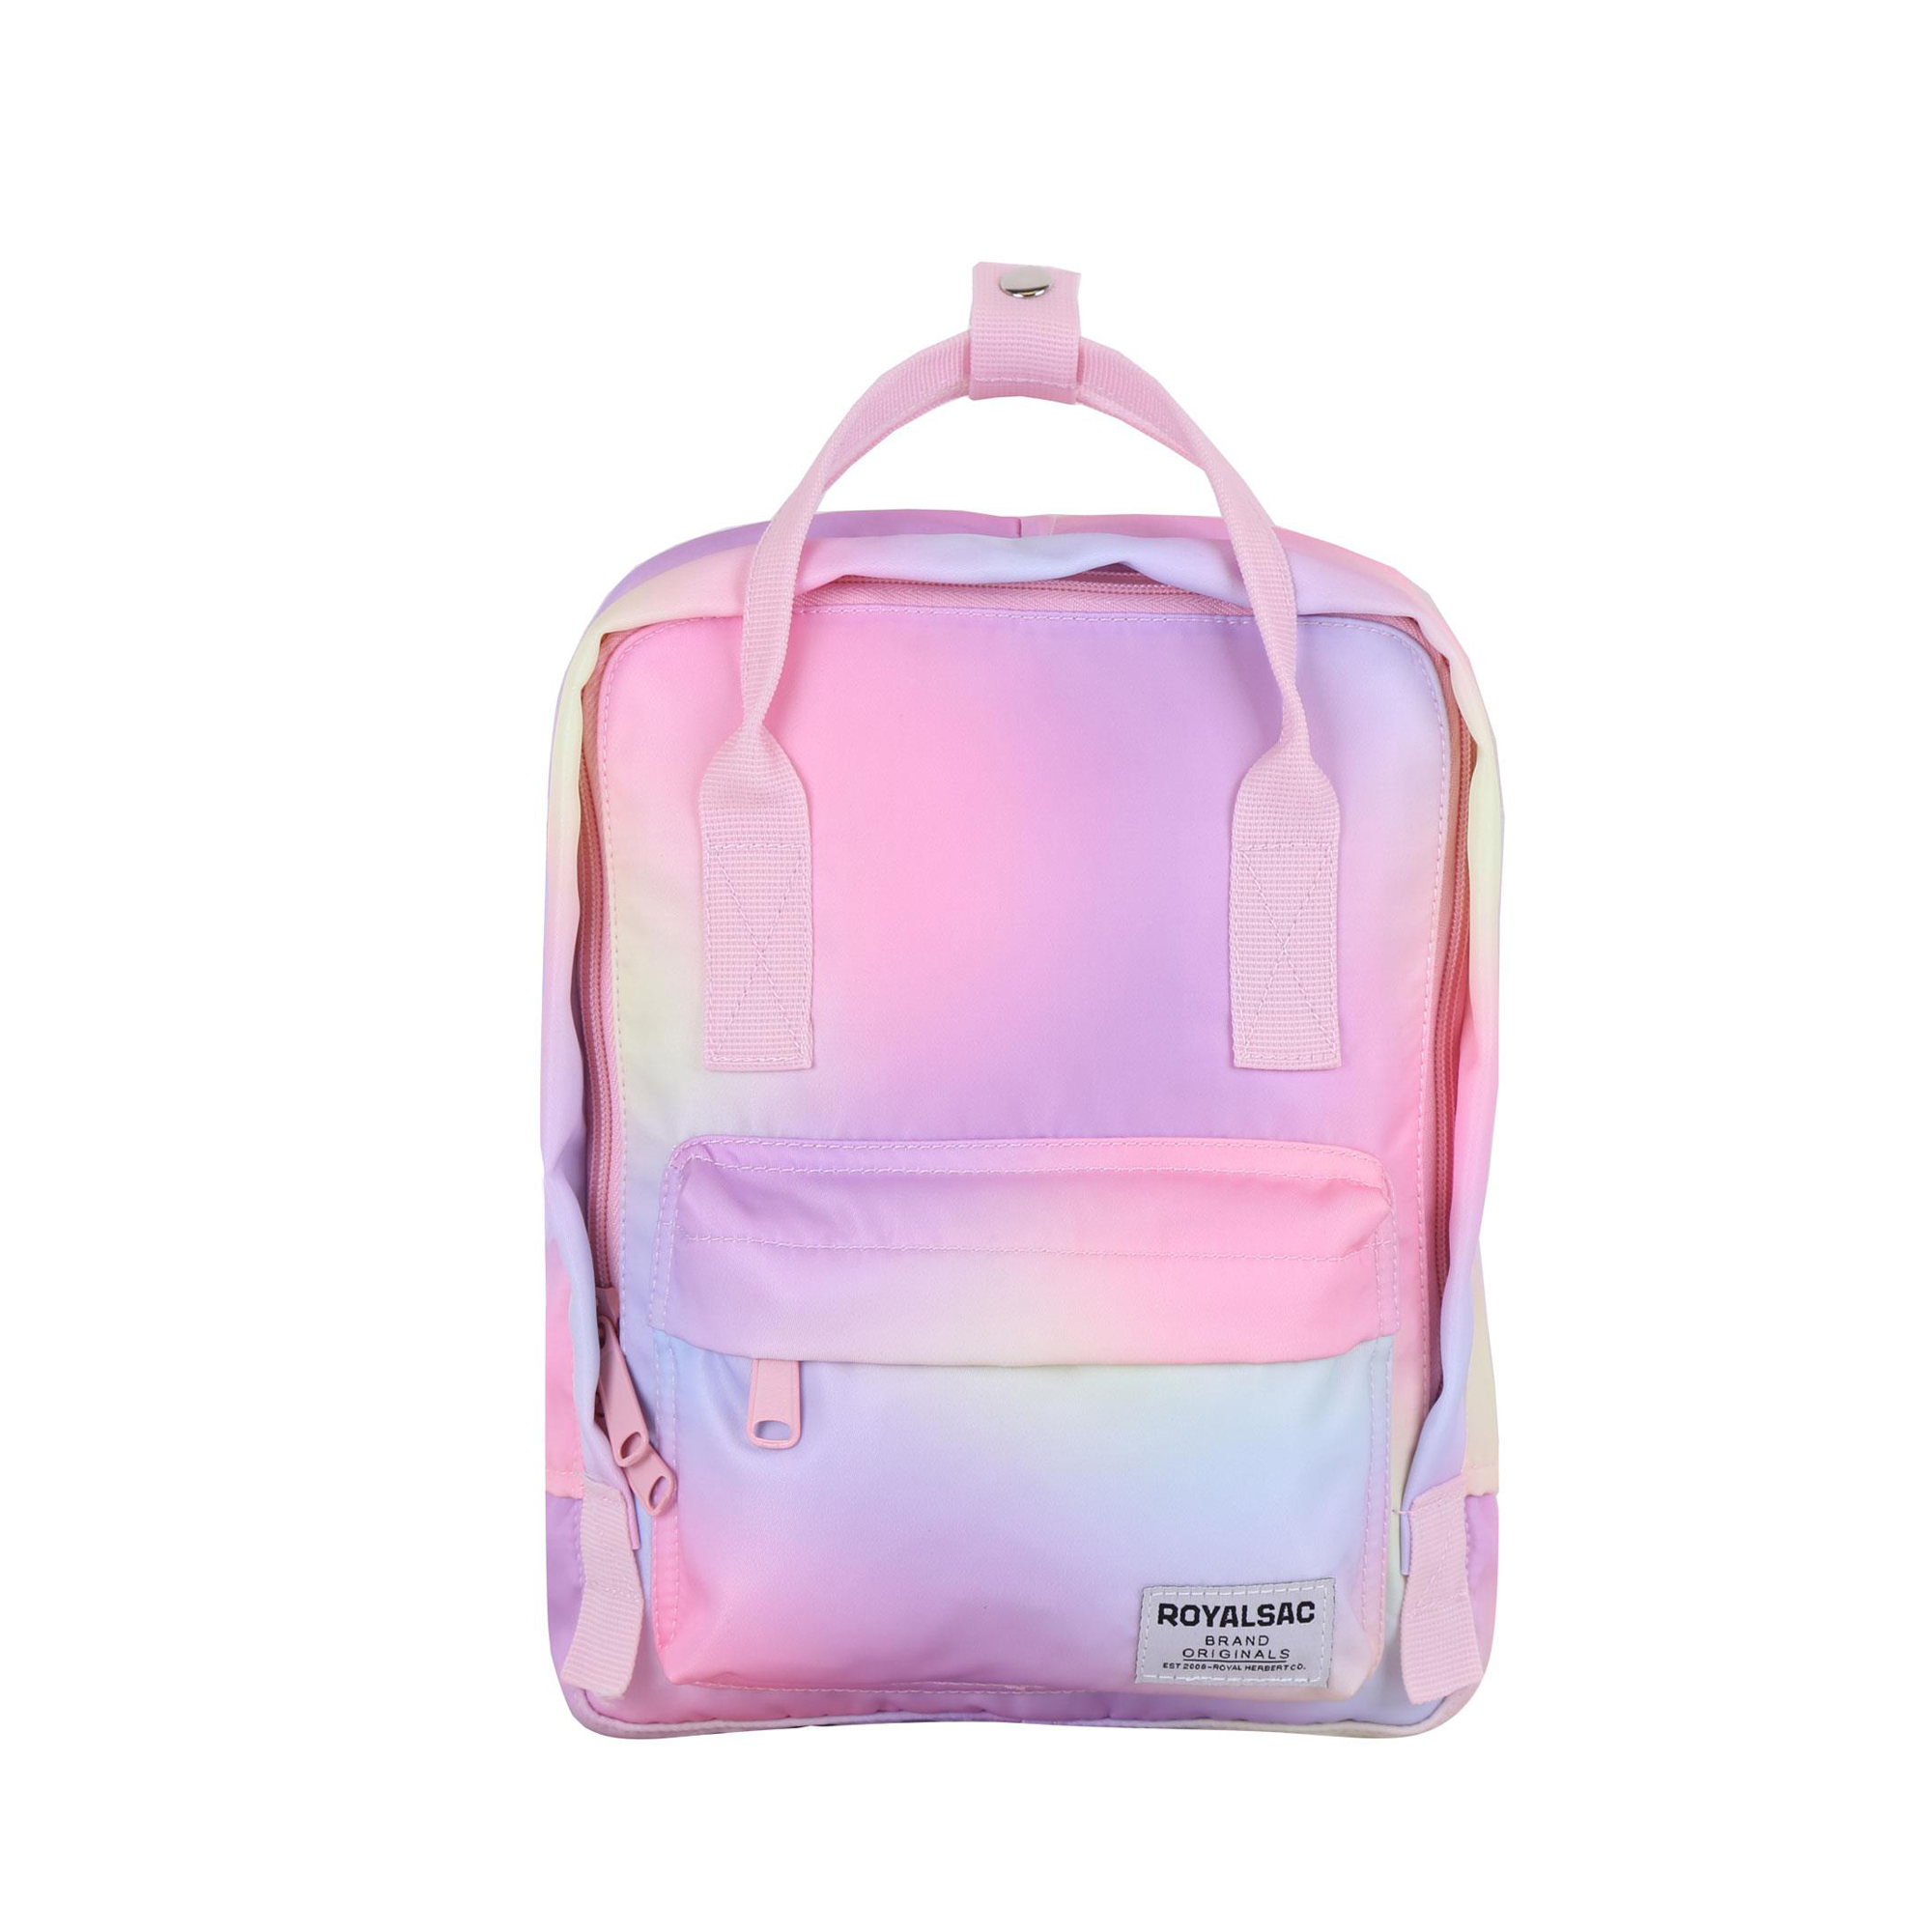 Wholesale Price China Usb Laptop Backpack Manufacture -
 B1010-001 Twill – Herbert